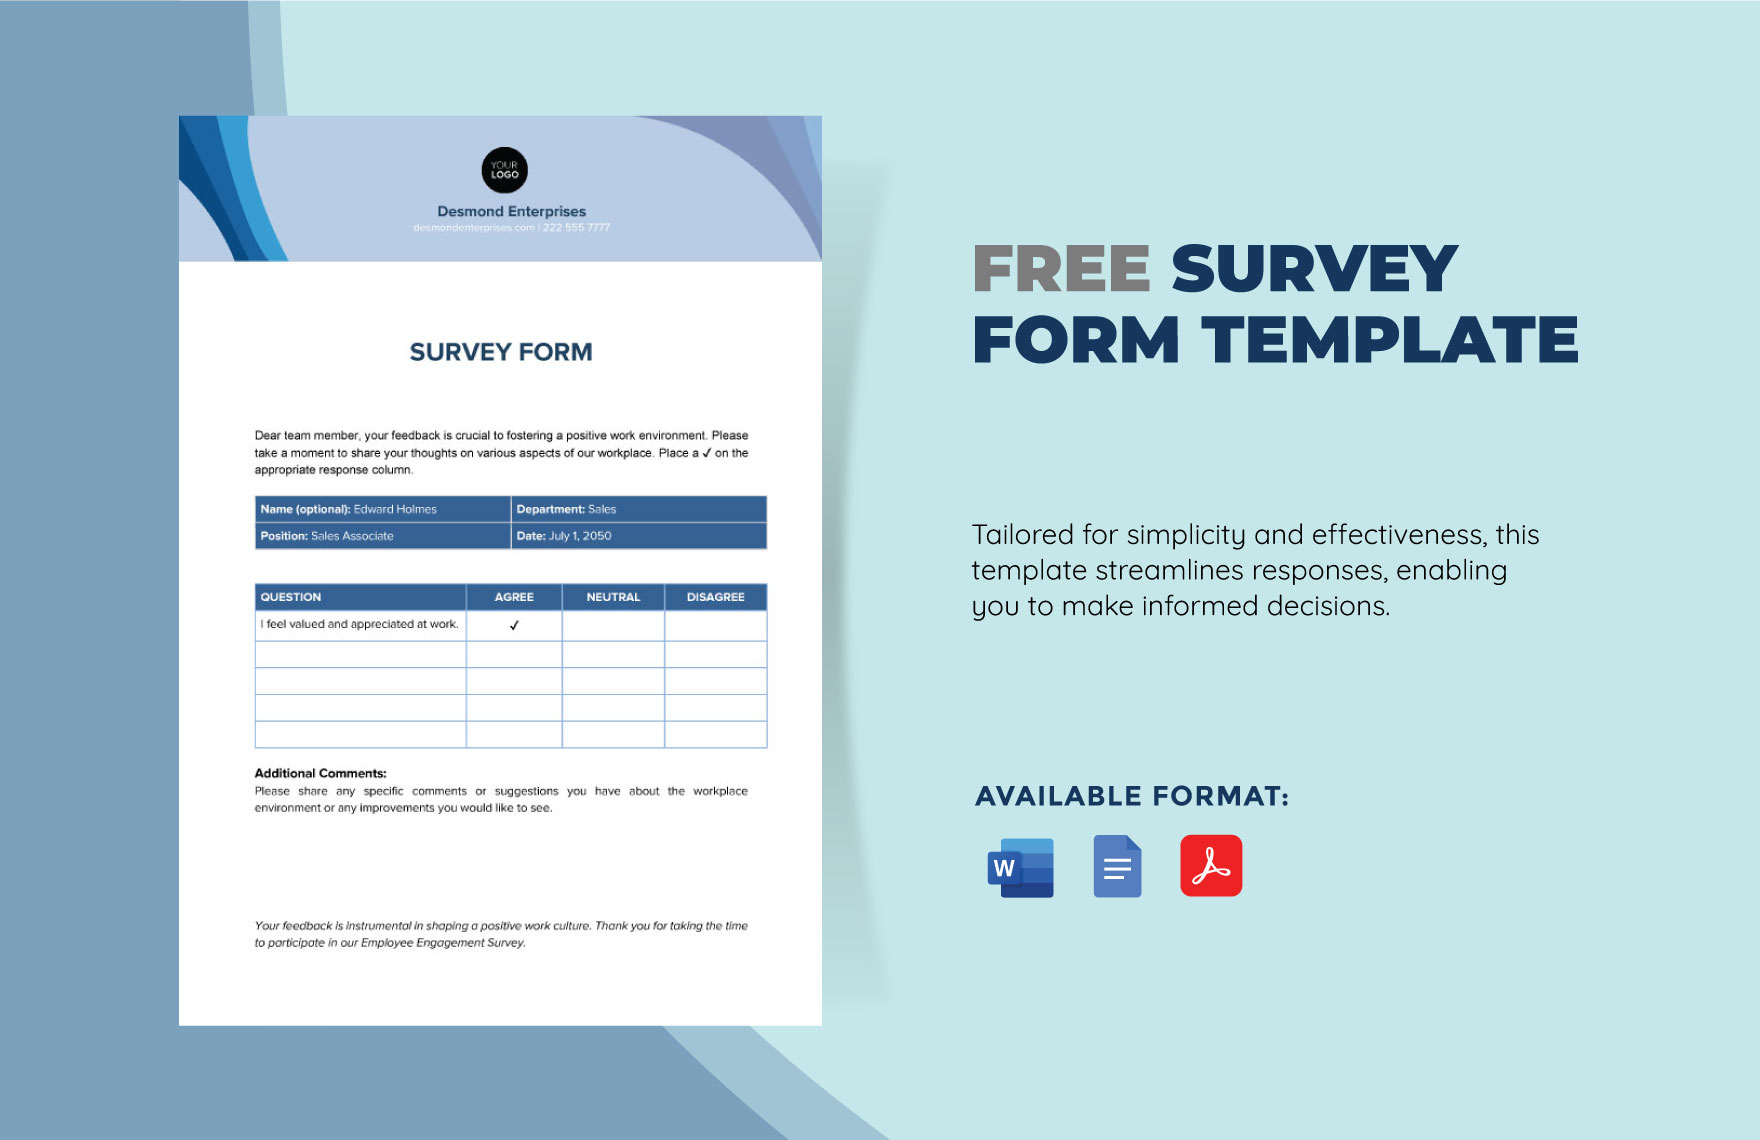 Free Survey Form Template in Word, Google Docs, PDF